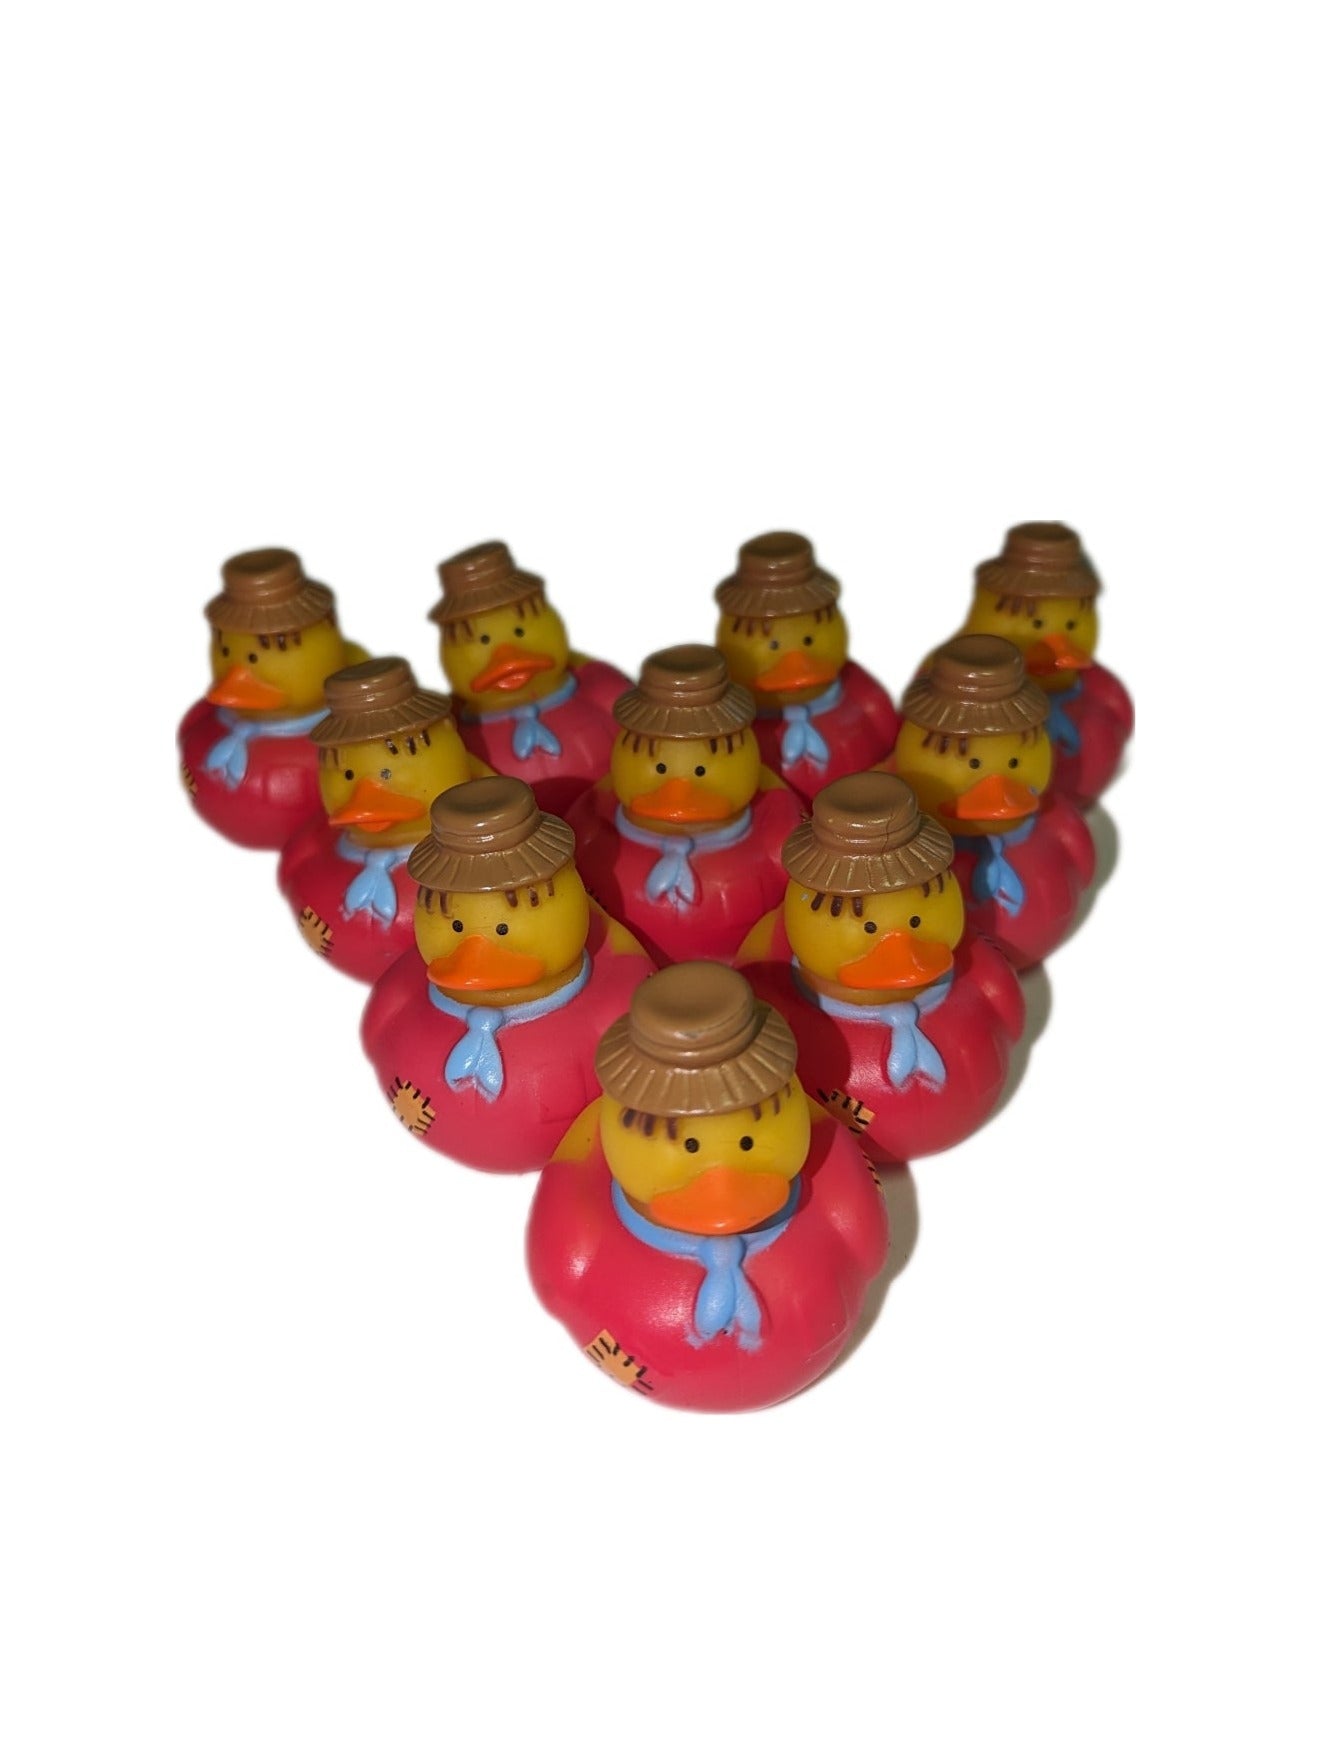 10 Red Sweater Scarecrows - 2" Rubber Ducks